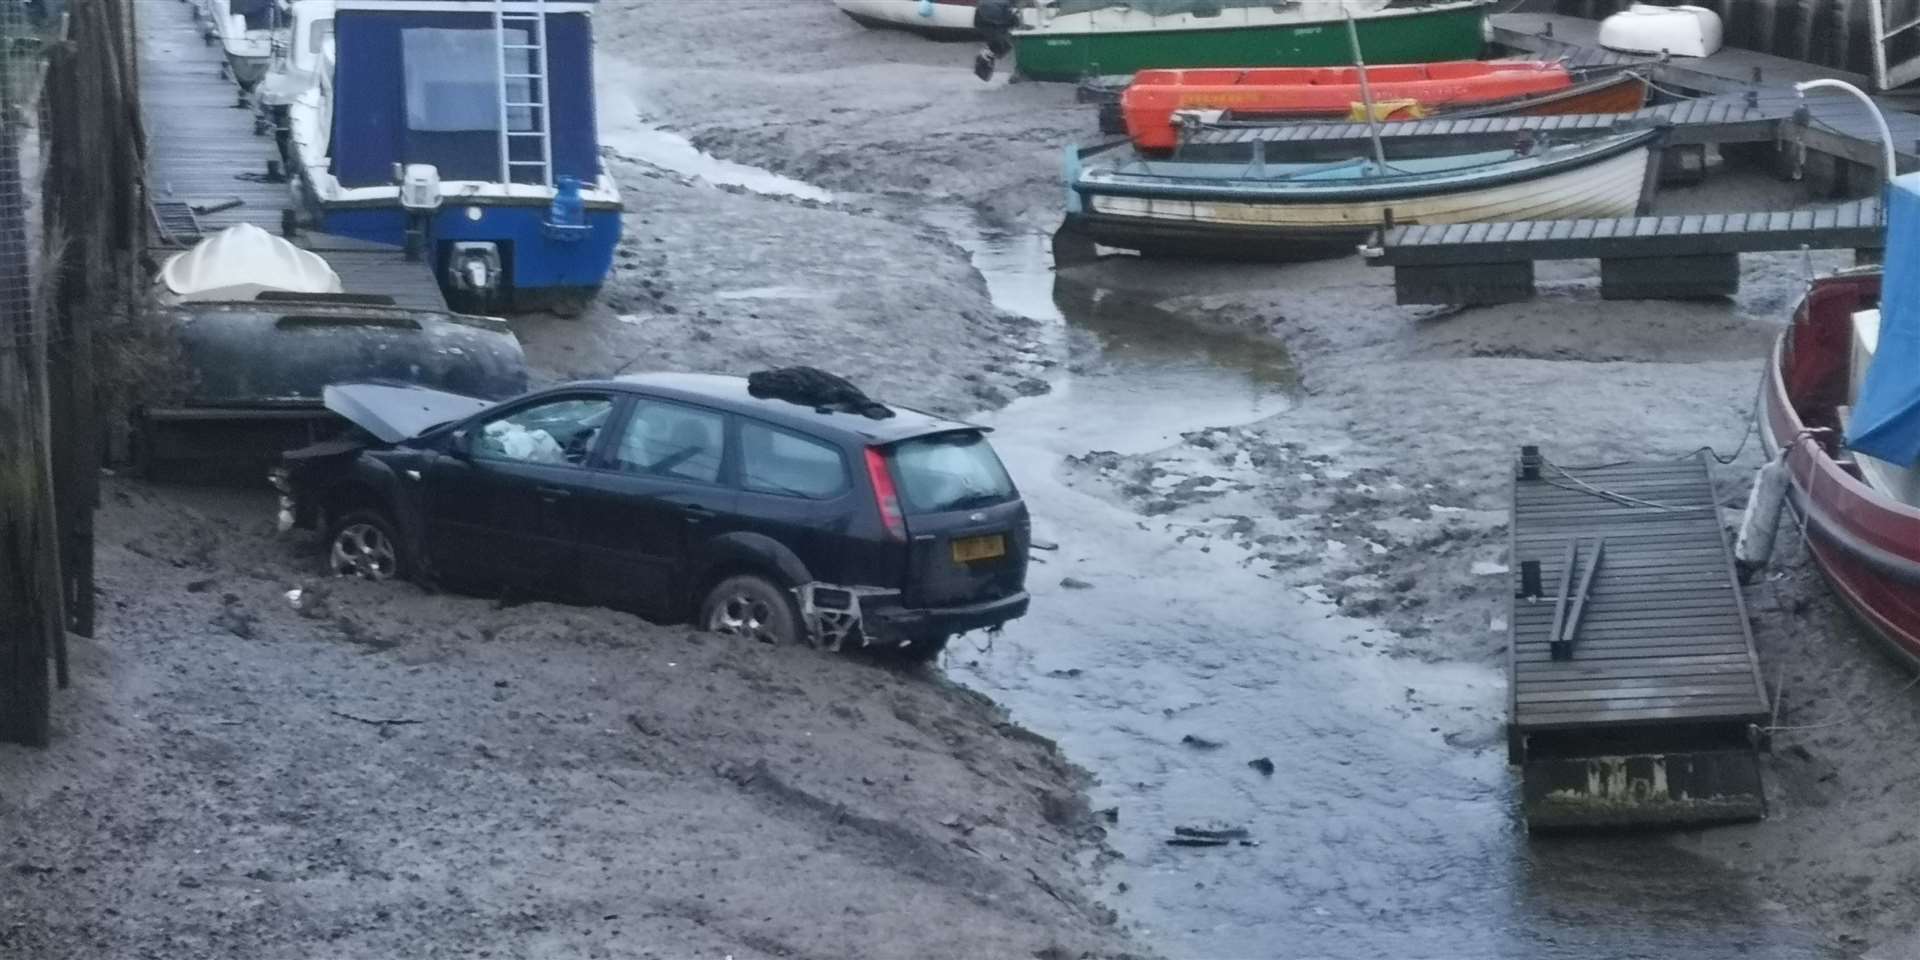 Car crashes into Oare creek by Youngs Boat Yard off The Street Oare (7057587)